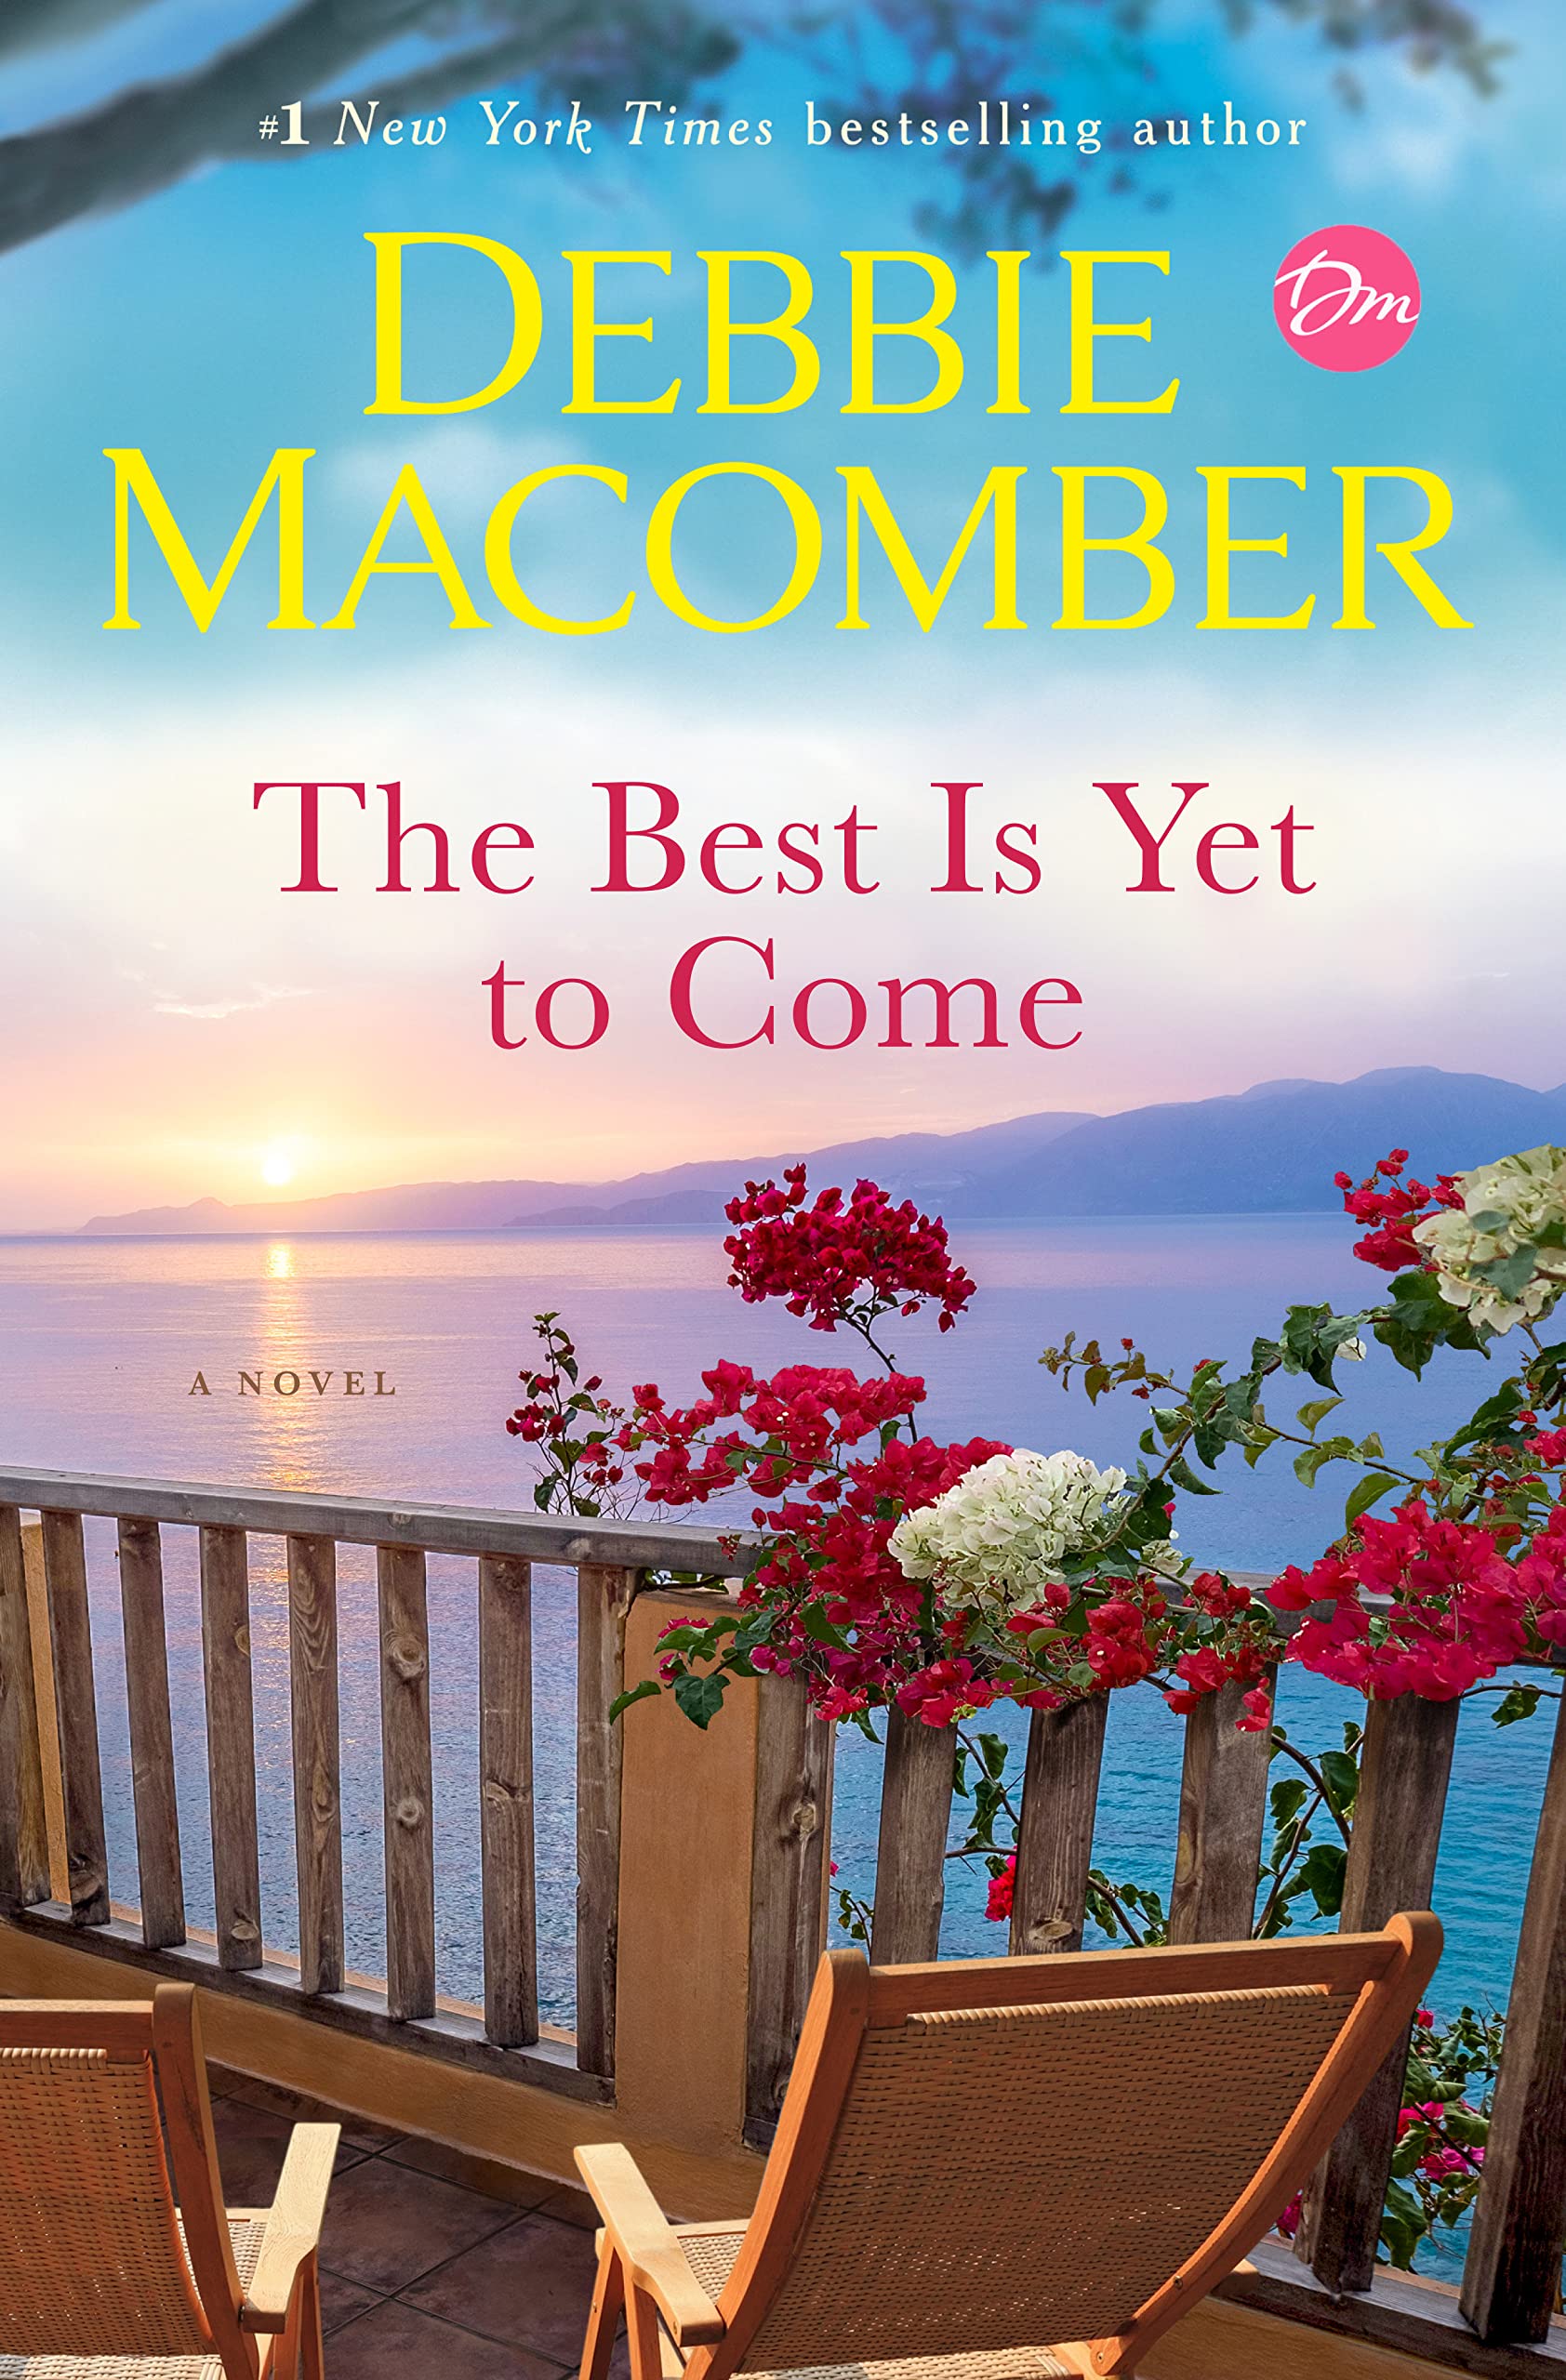 Image for "The Best Is Yet to Come"